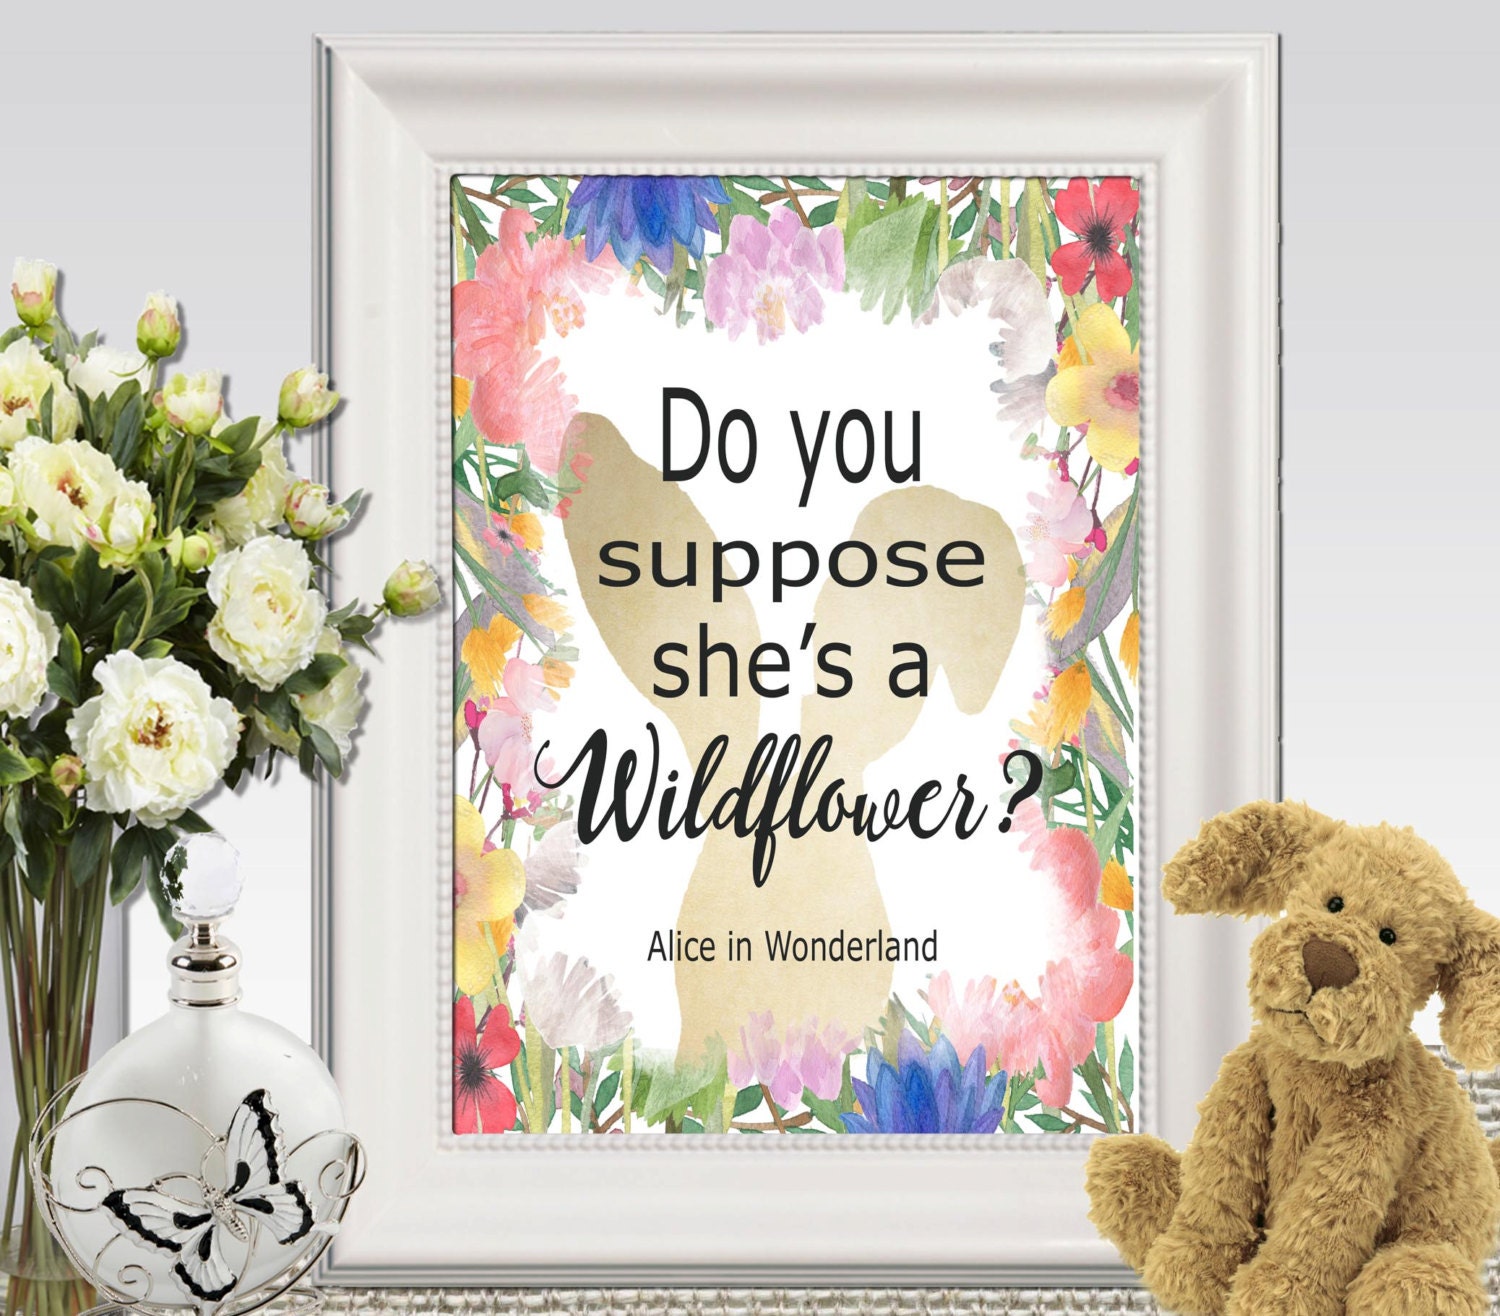 Download Do you suppose shes a wildflower printable Alice in Wonderland